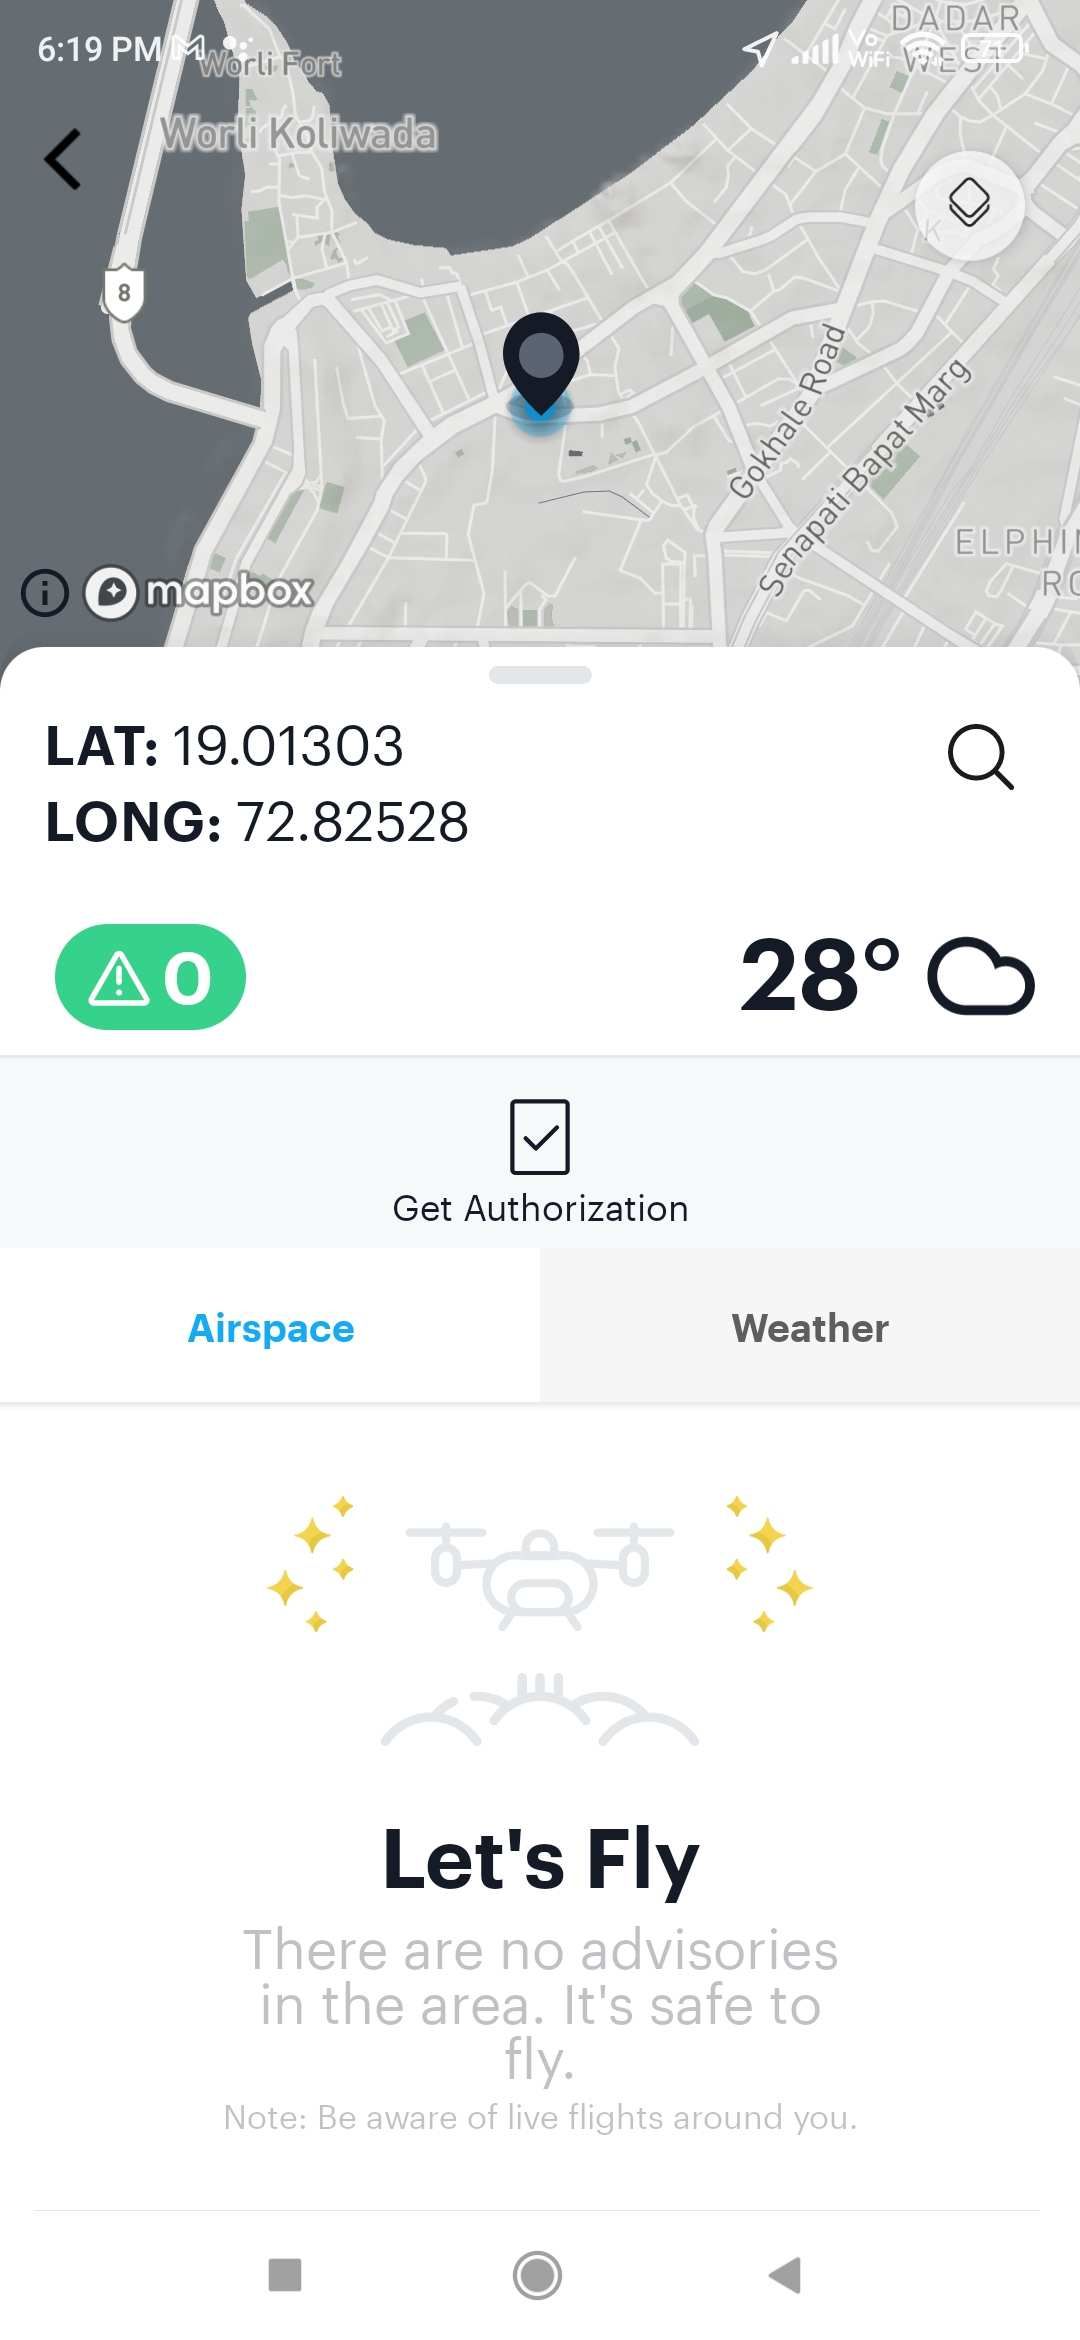 Aloft tells you whether it's safe to fly in your area, and adds important information about weather and conditions